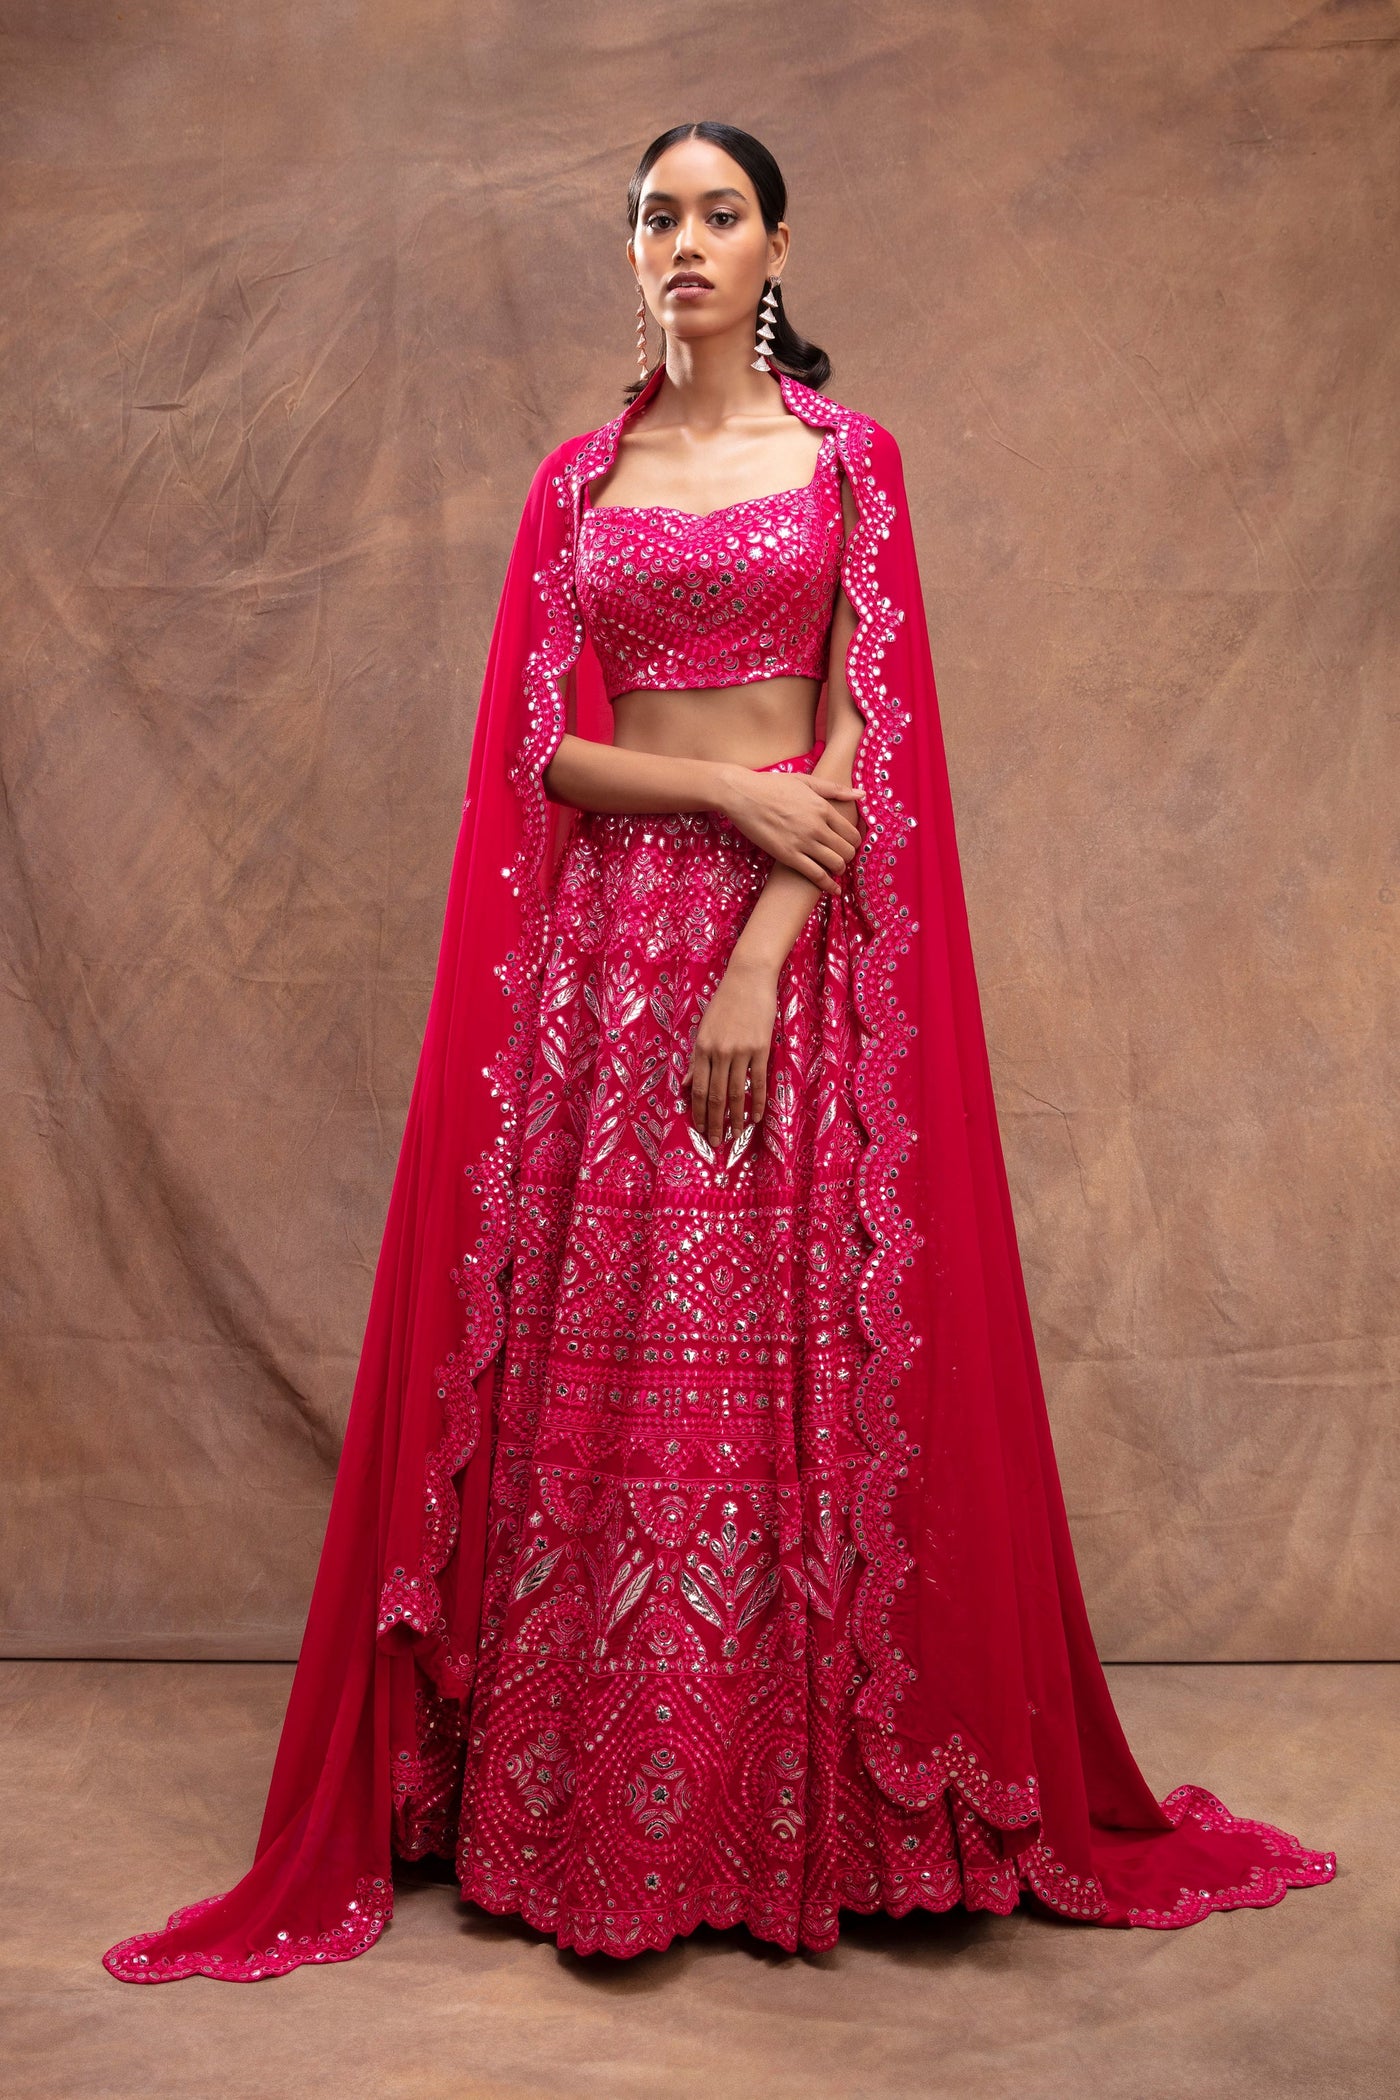 Magenta Georgette Lehenga - Indian Clothing in Denver, CO, Aurora, CO, Boulder, CO, Fort Collins, CO, Colorado Springs, CO, Parker, CO, Highlands Ranch, CO, Cherry Creek, CO, Centennial, CO, and Longmont, CO. Nationwide shipping USA - India Fashion X